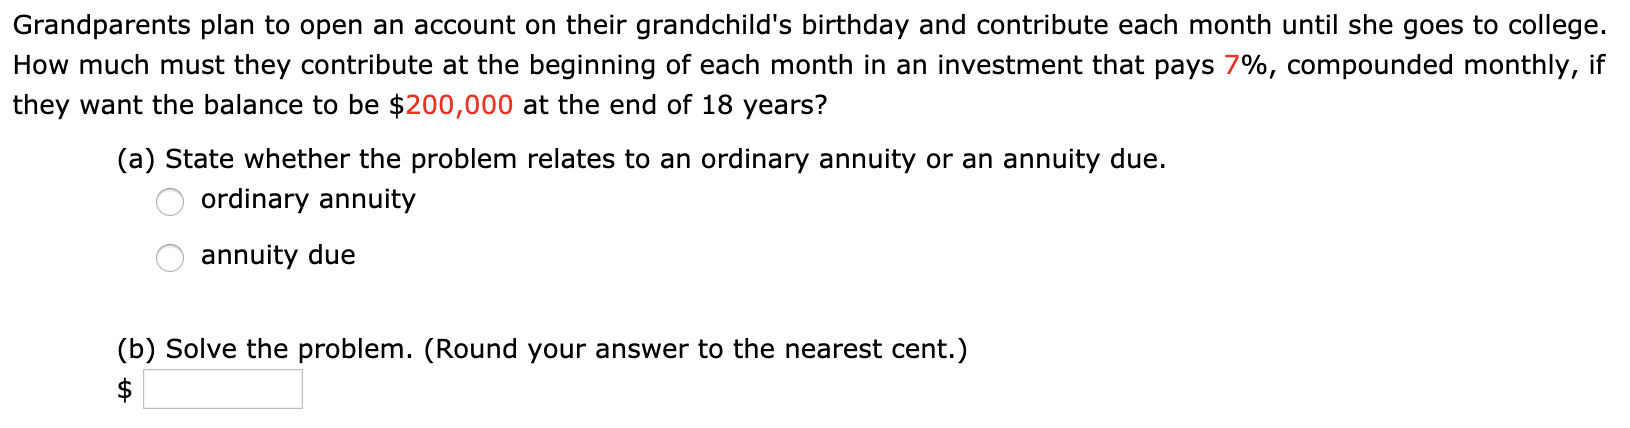 Grandparents plan to open an account on their grandchild's birthday and contribute each month until she goes to college.
How much must they contribute at the beginning of each month in an investment that pays 7%, compounded monthly, if
they want the balance to be $200,000 at the end of 18 years?
(a) State whether the problem relates to an ordinary annuity or an annuity due.
ordinary annuity
annuity due
(b) Solve the problem. (Round your answer to the nearest cent.)
